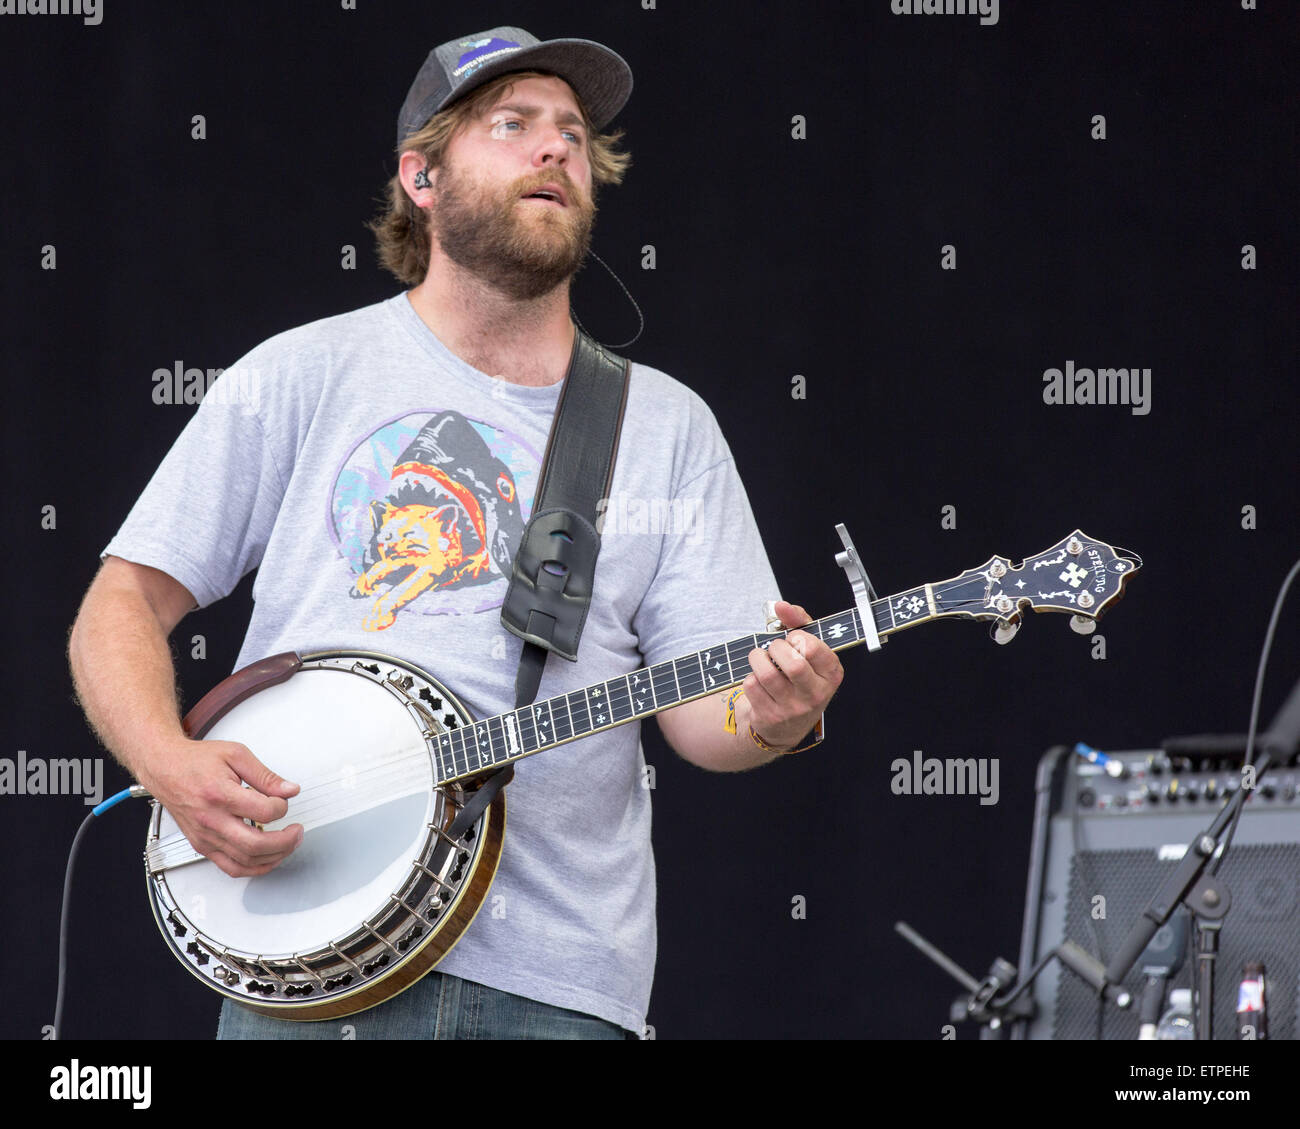 June 13, 2015 - Manchester, Tennessee, U.S - Musician DAVE CARROLL of Trampled by Turtles performs live on stage at the Bonnaroo Arts and Music Festival Manchester, Tennessee (Credit Image: © Daniel DeSlover/ZUMA Wire) Stock Photo